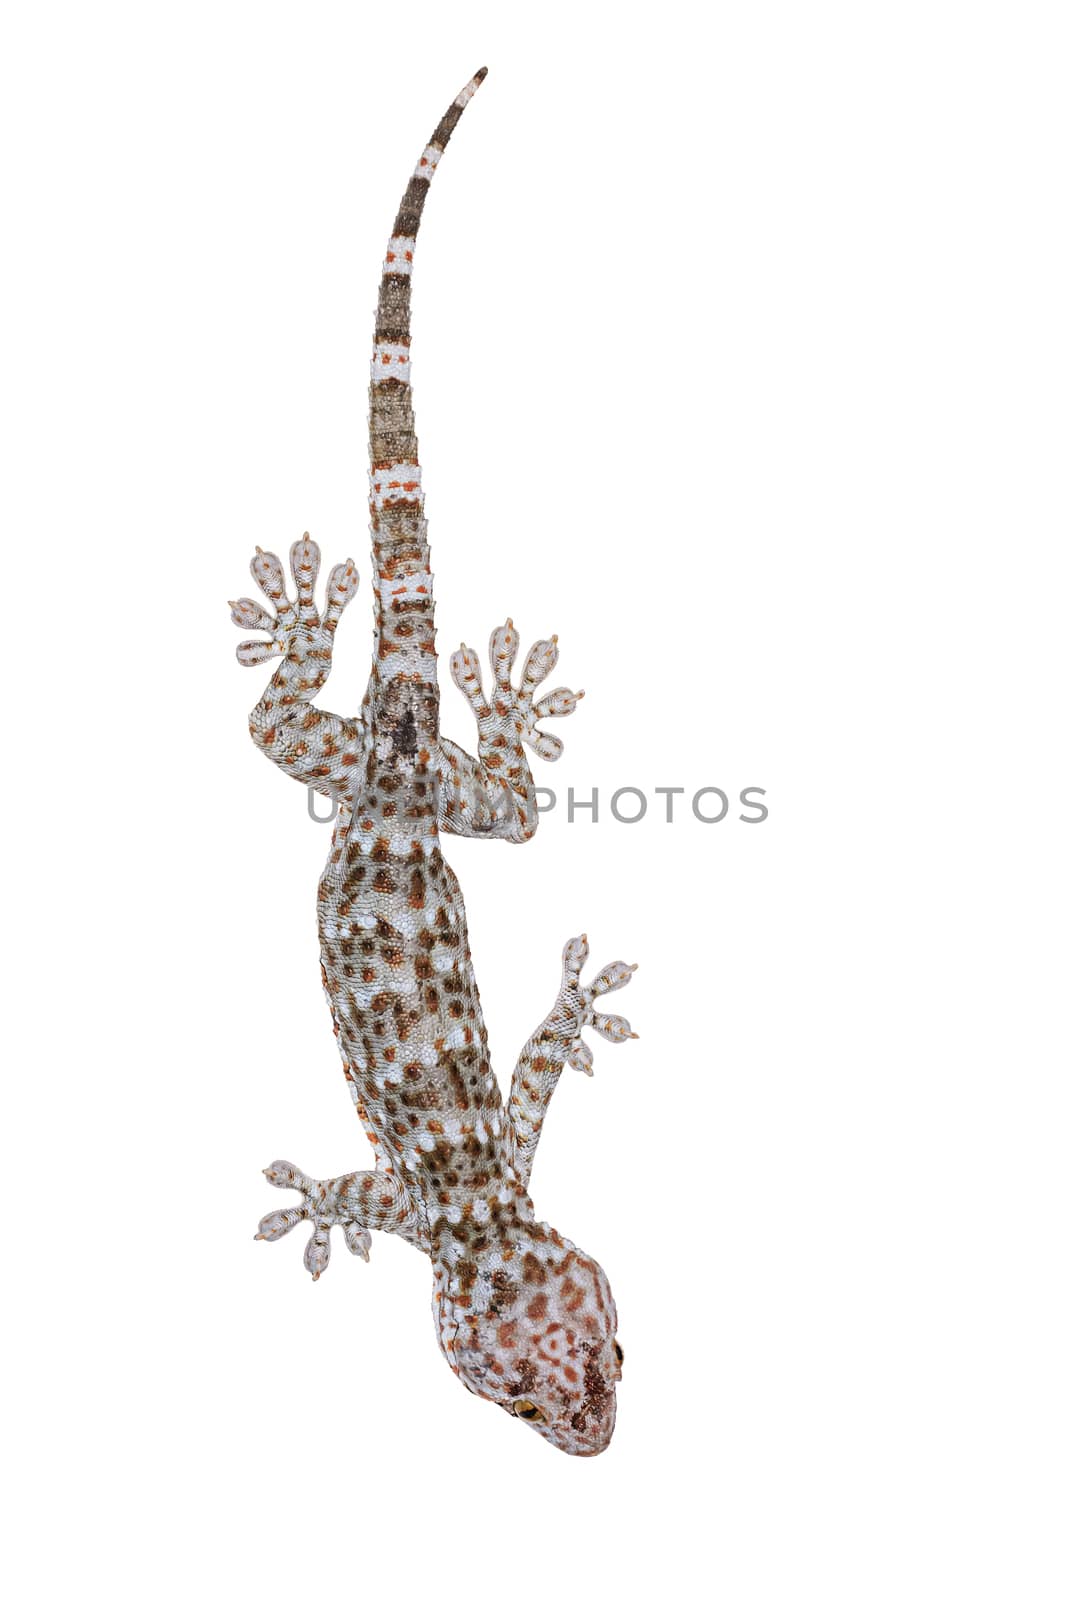 Gecko isolated on white background with clipping path